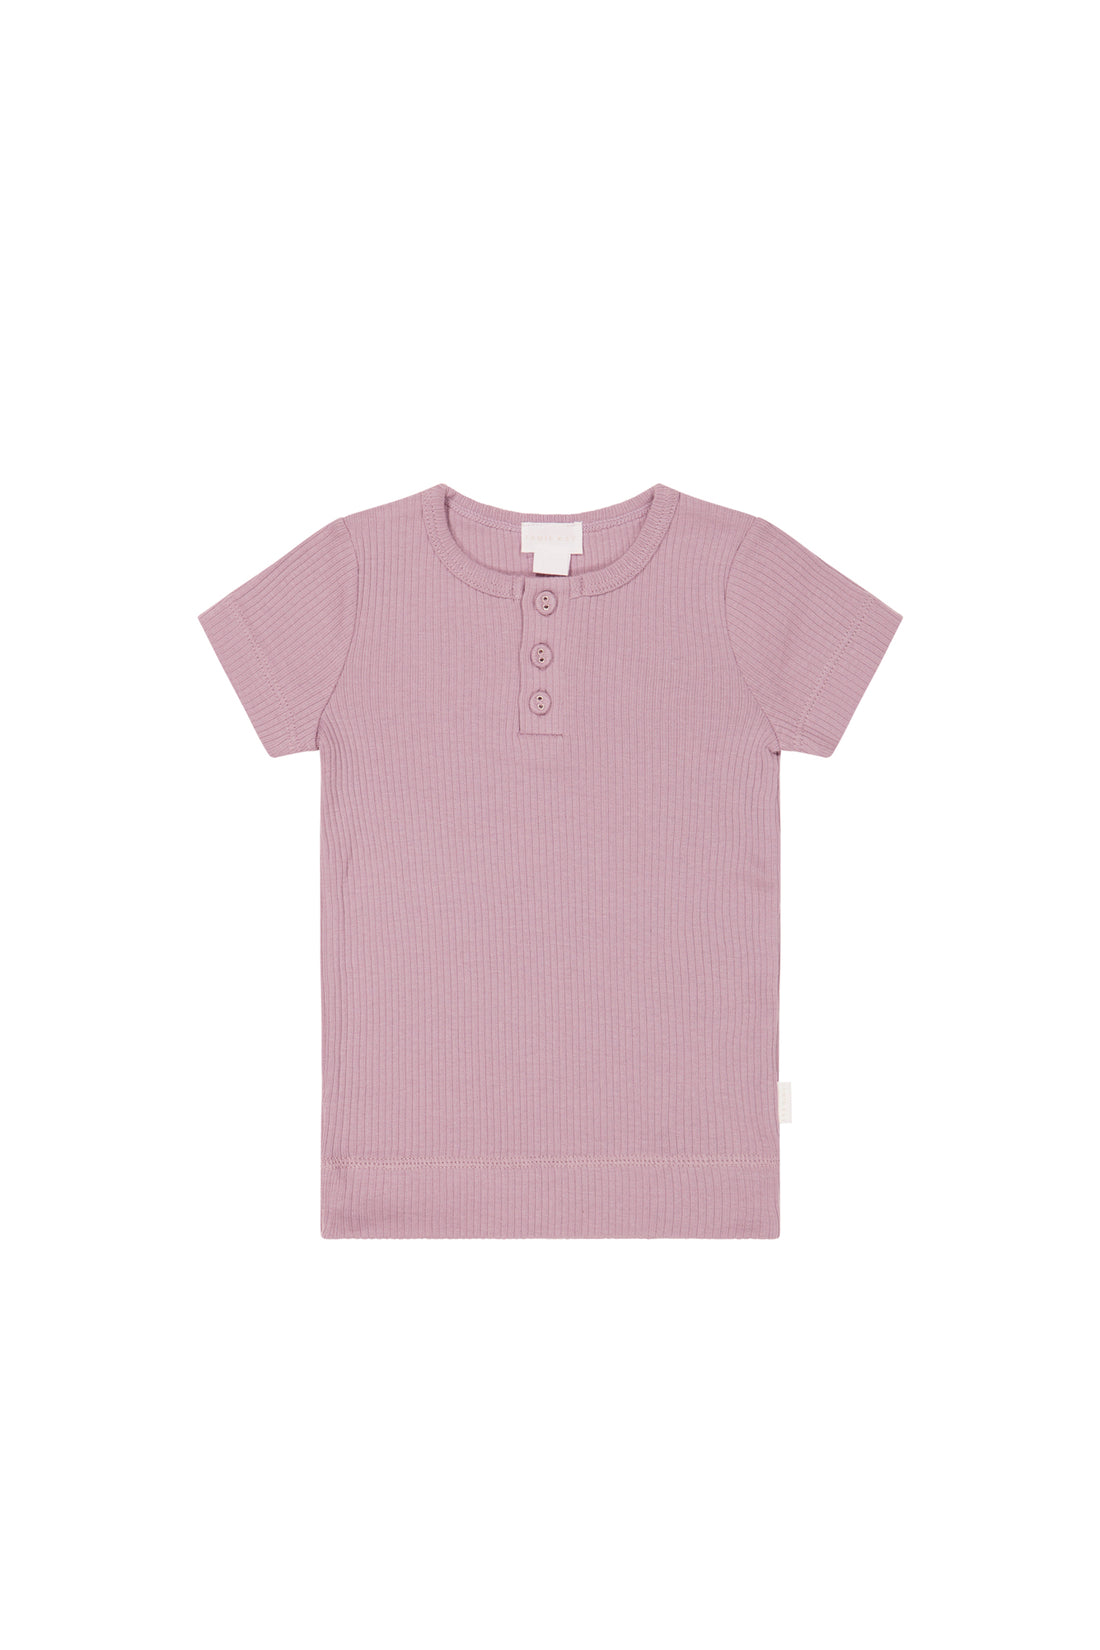 Organic Cotton Modal Henley Tee - Vintage Violet Childrens Top from Jamie Kay USA